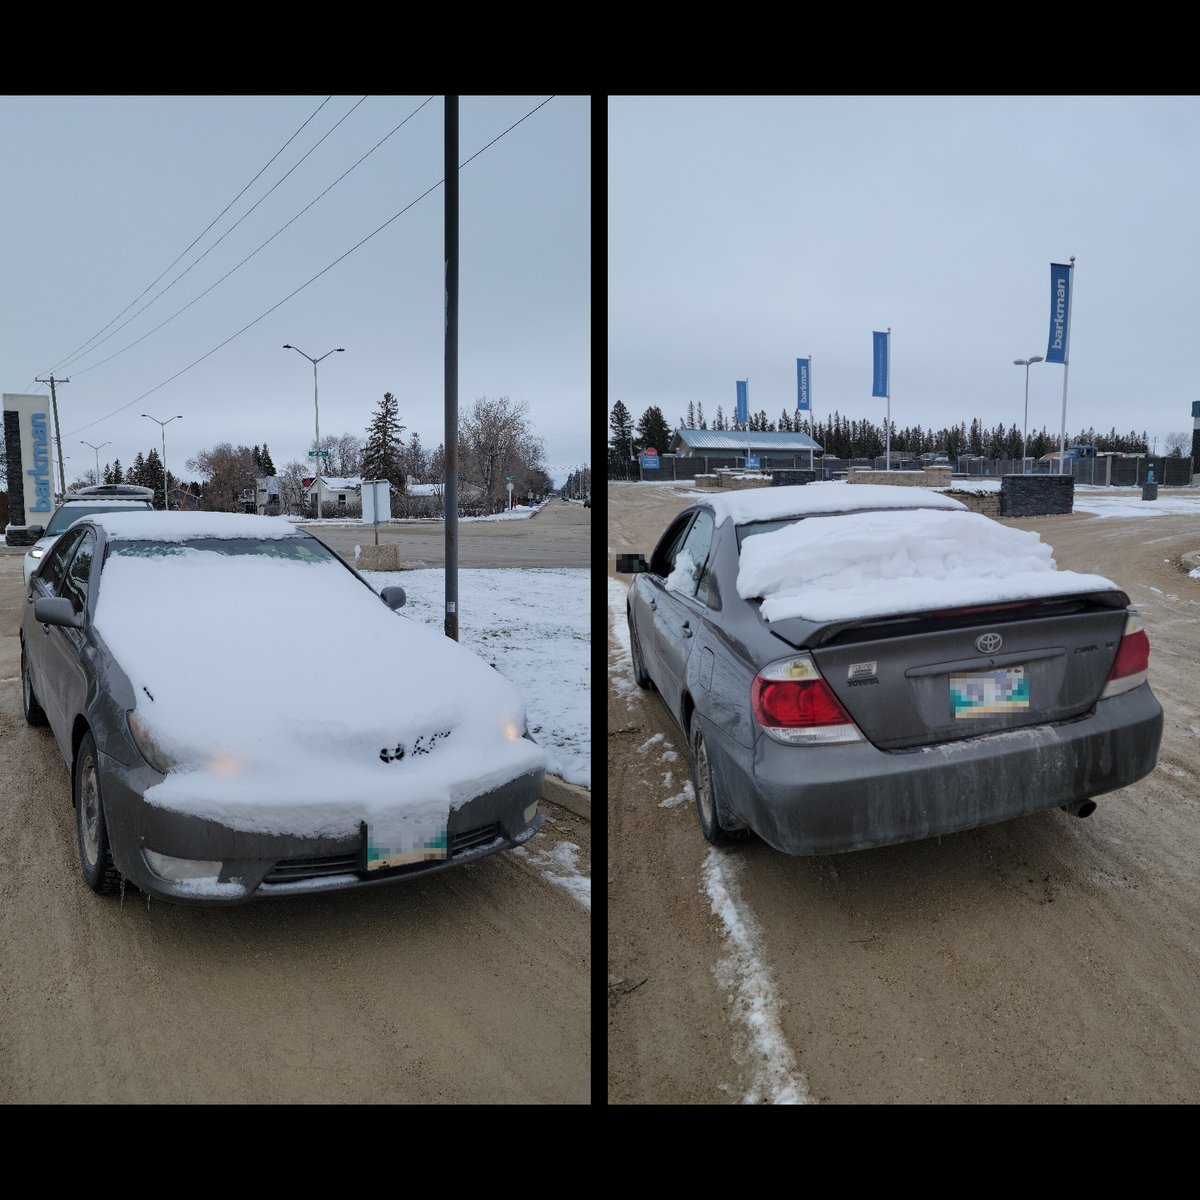 REMINDER: CLEAR YOUR WINDSHIELD! This vehicle was pulled over in Steinbach on November 11 for driving with an obstructed view. The 20-year-old driver was adamant he could see🤦. Fined HTA Sec 182(4) : $113. #noexcuses #TrafficTues #rcmpmb